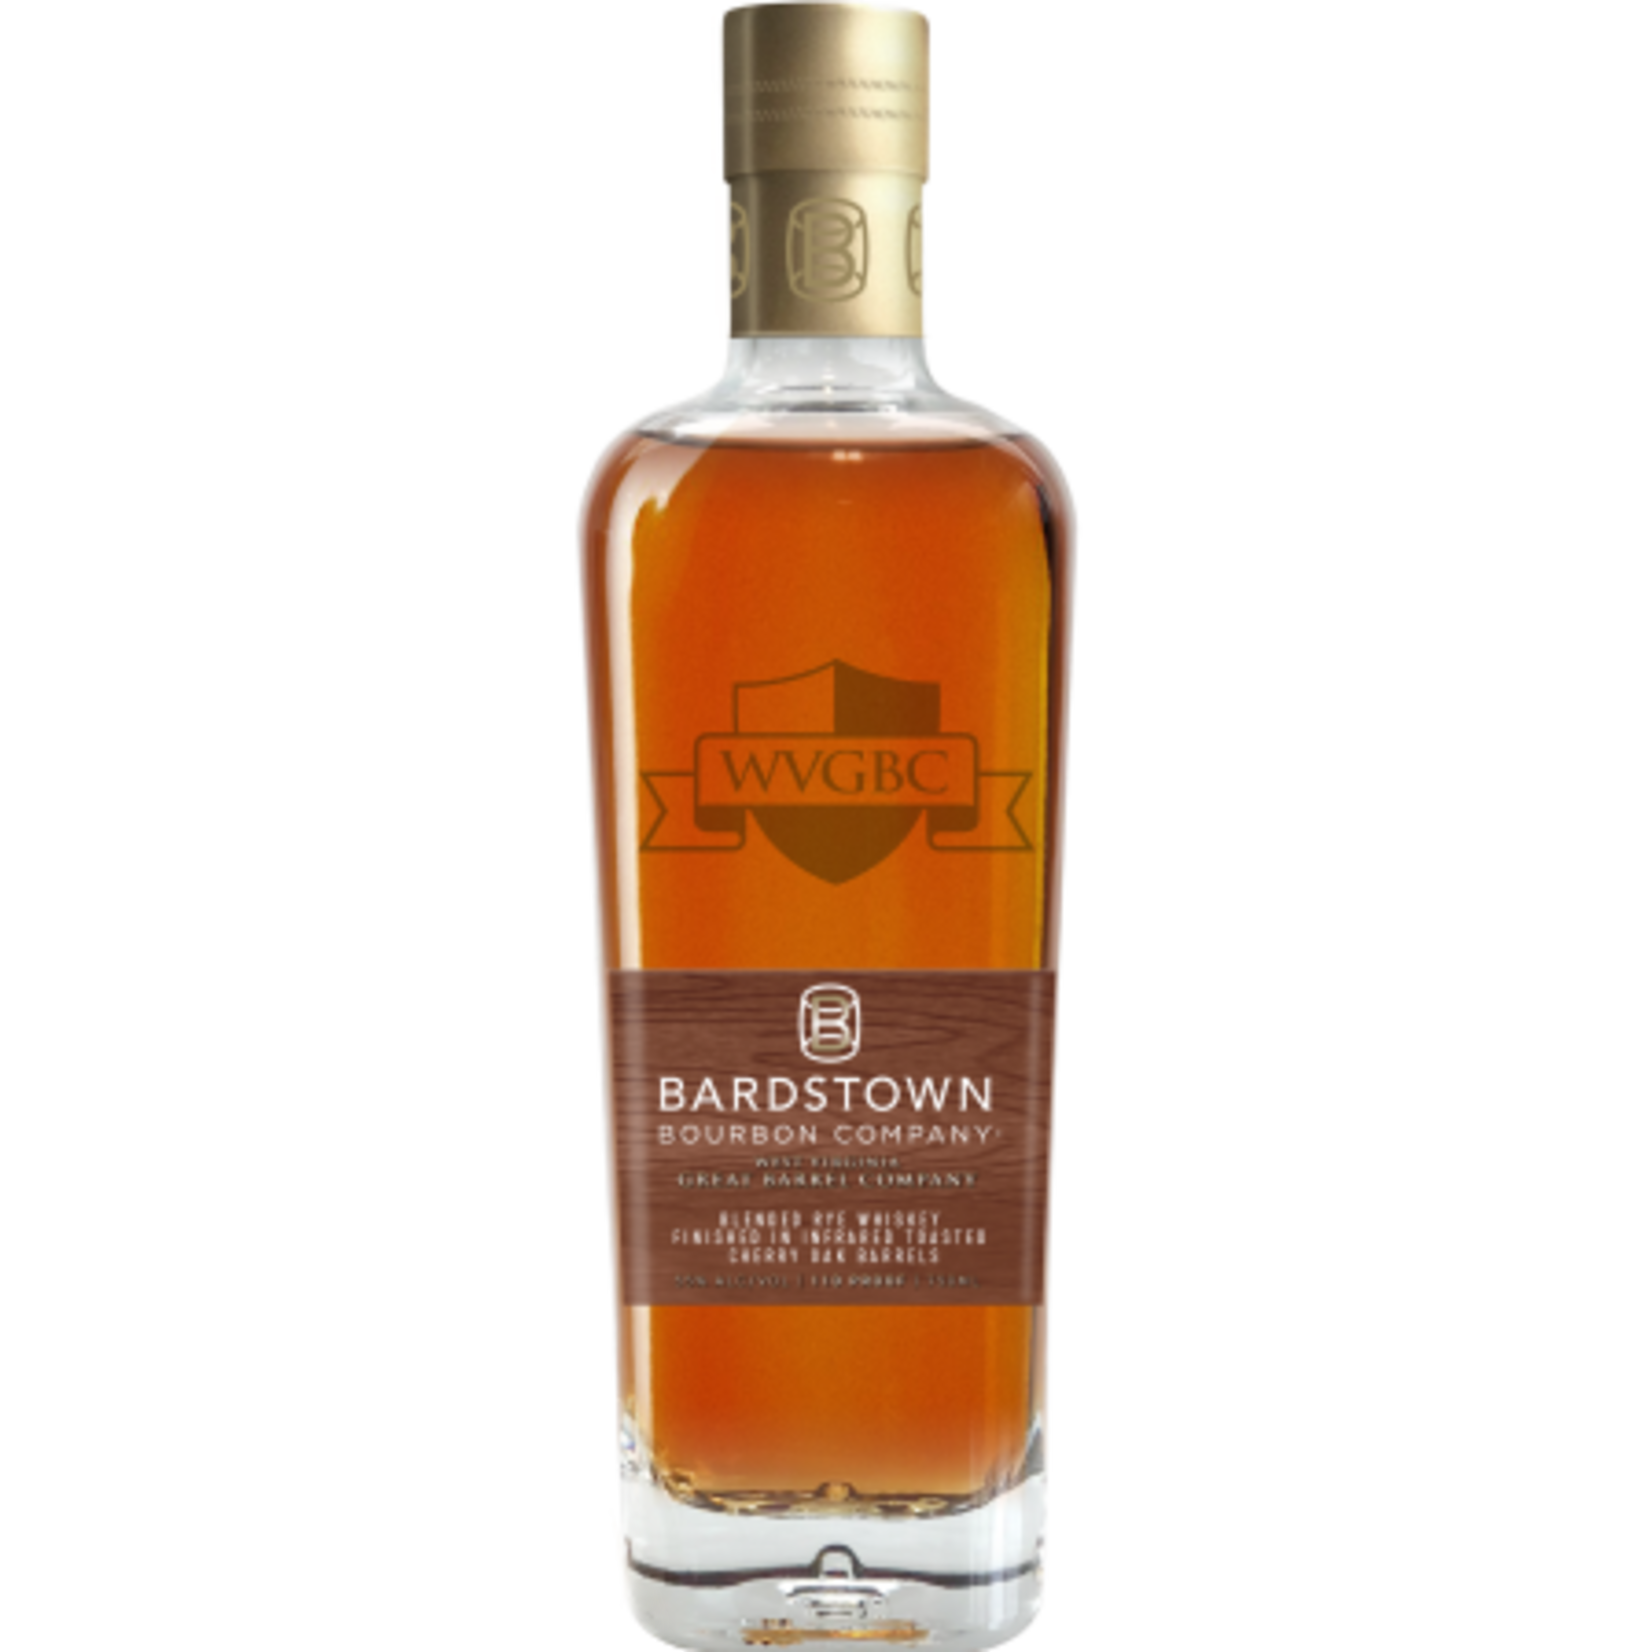 Bardstown Bardstown Bourbon Company Collaborative Series West Virginia Barrel Co. Infrared Toasted Cherry Barrel Finished Rye